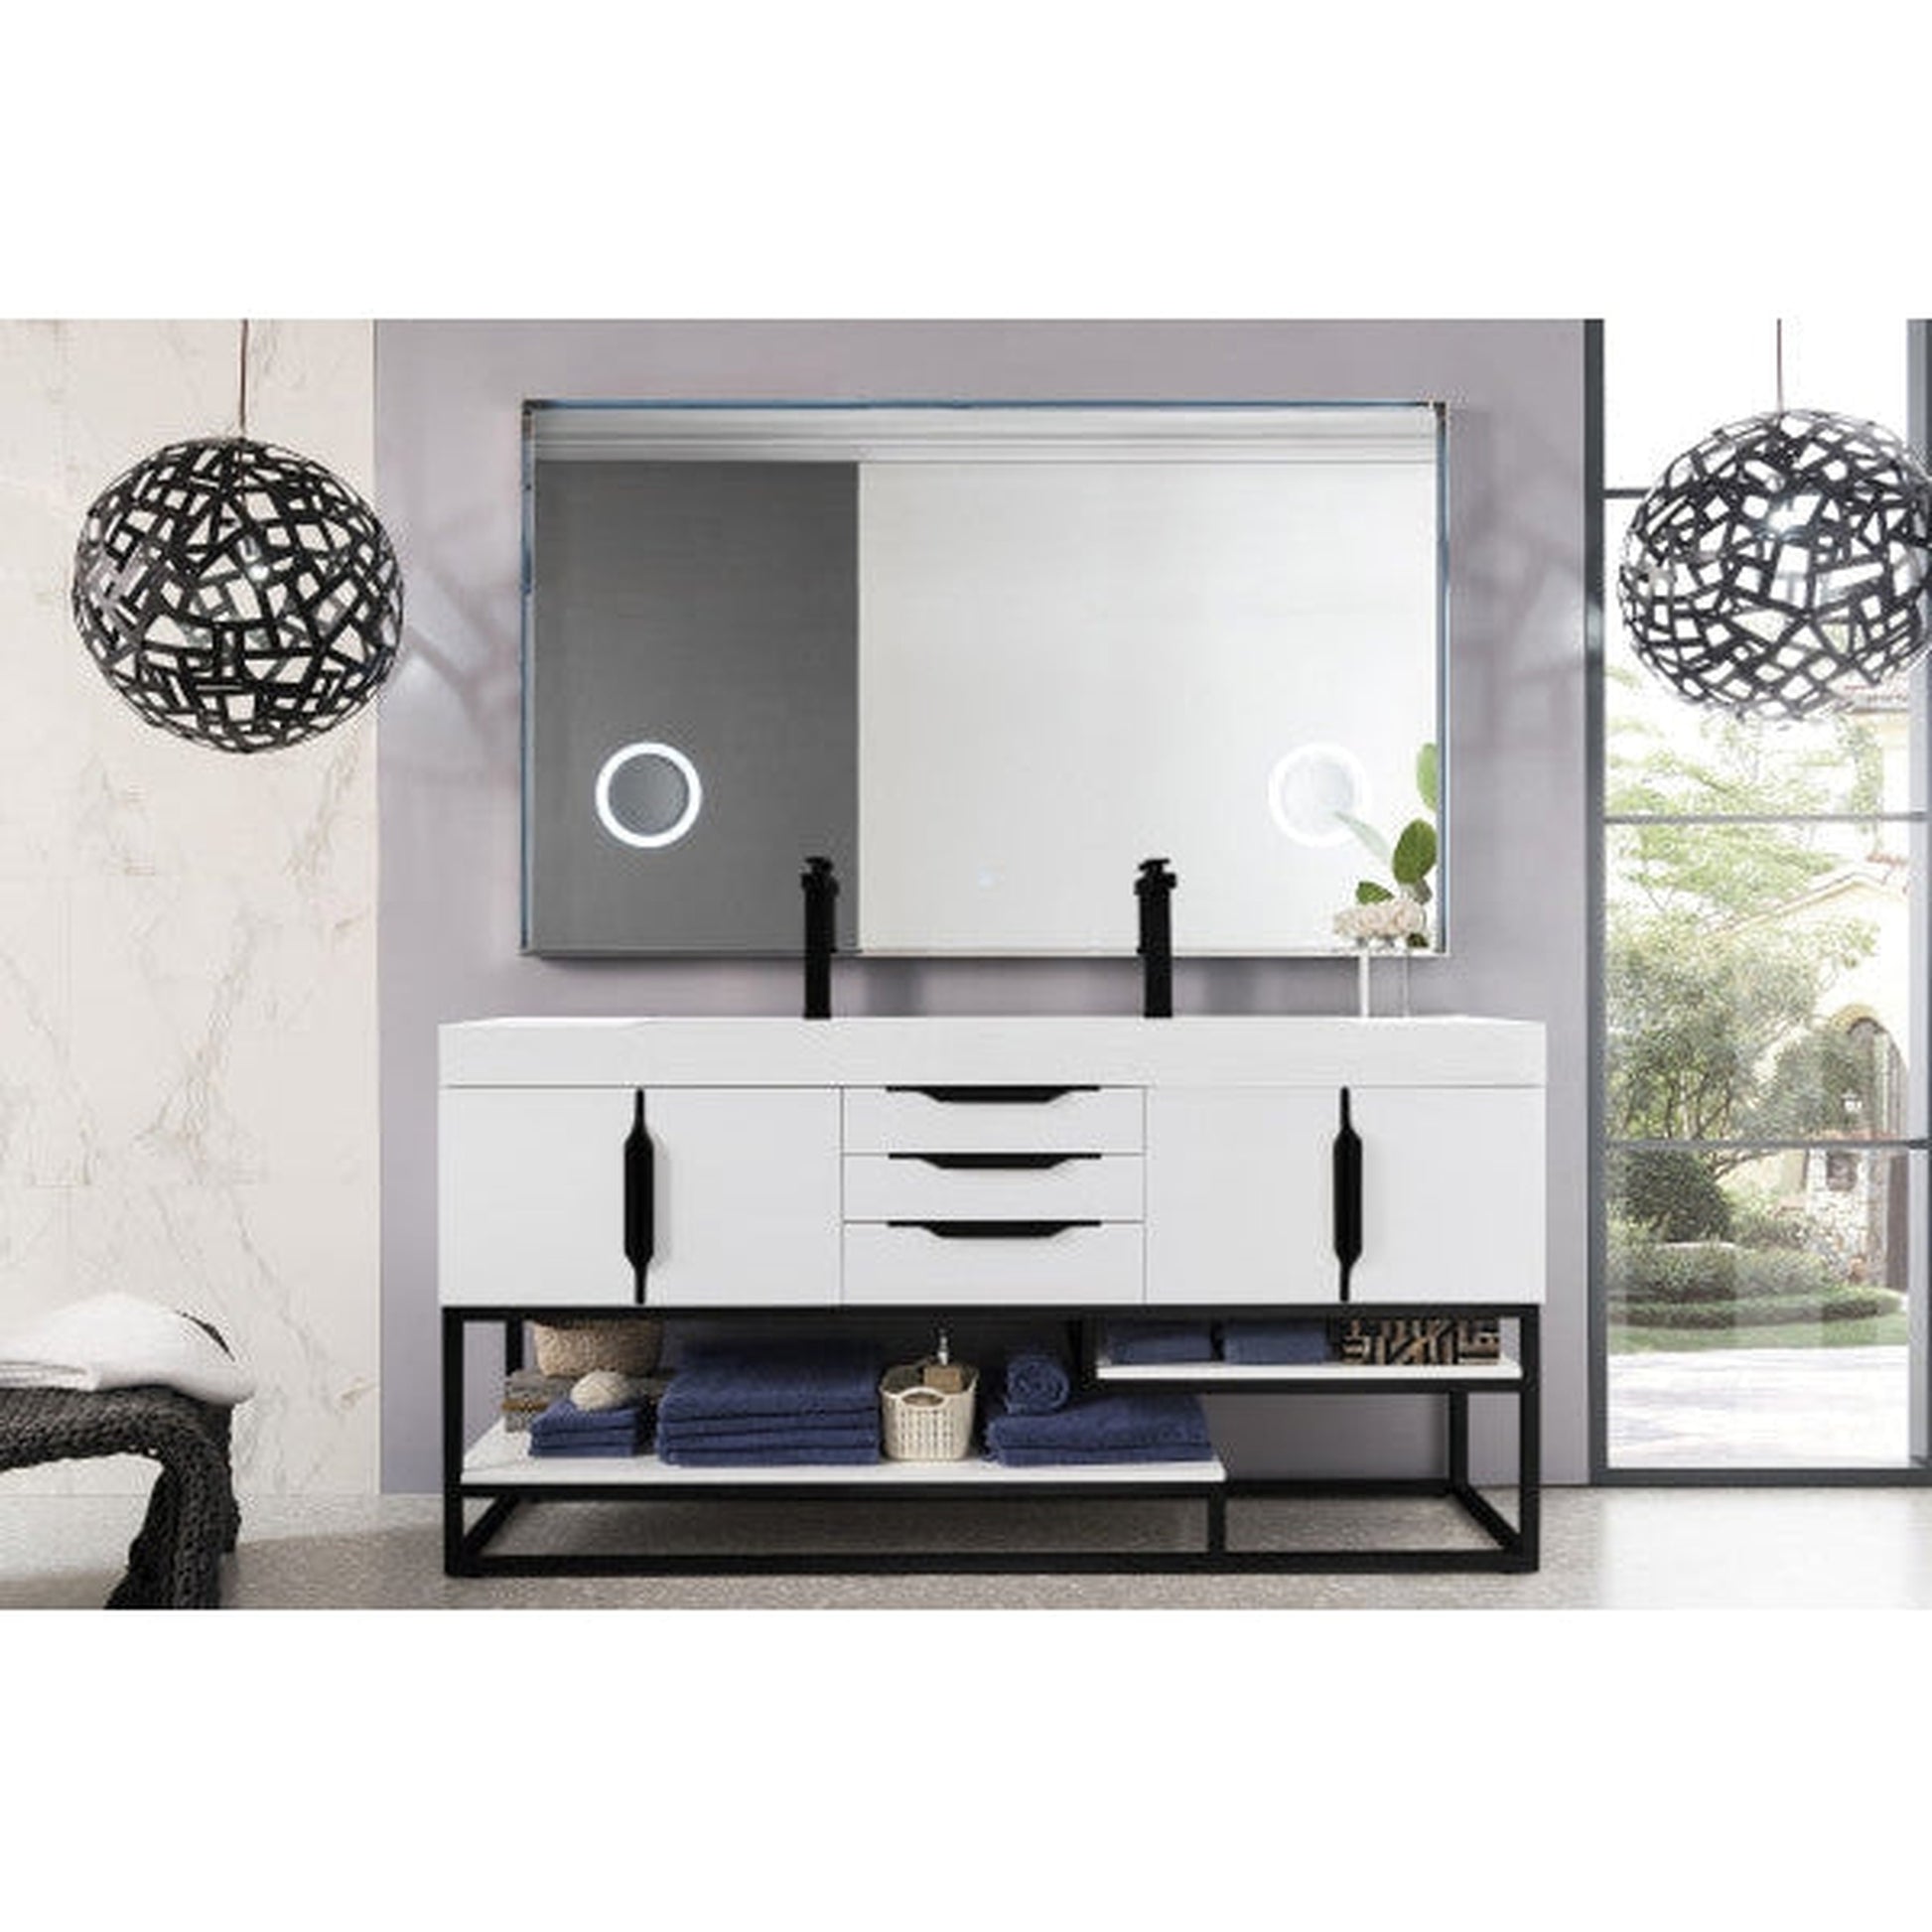 James Martin Columbia 73" Double Glossy White Bathroom Vanity With Matte Black Hardware and 6" Glossy White Composite Countertop